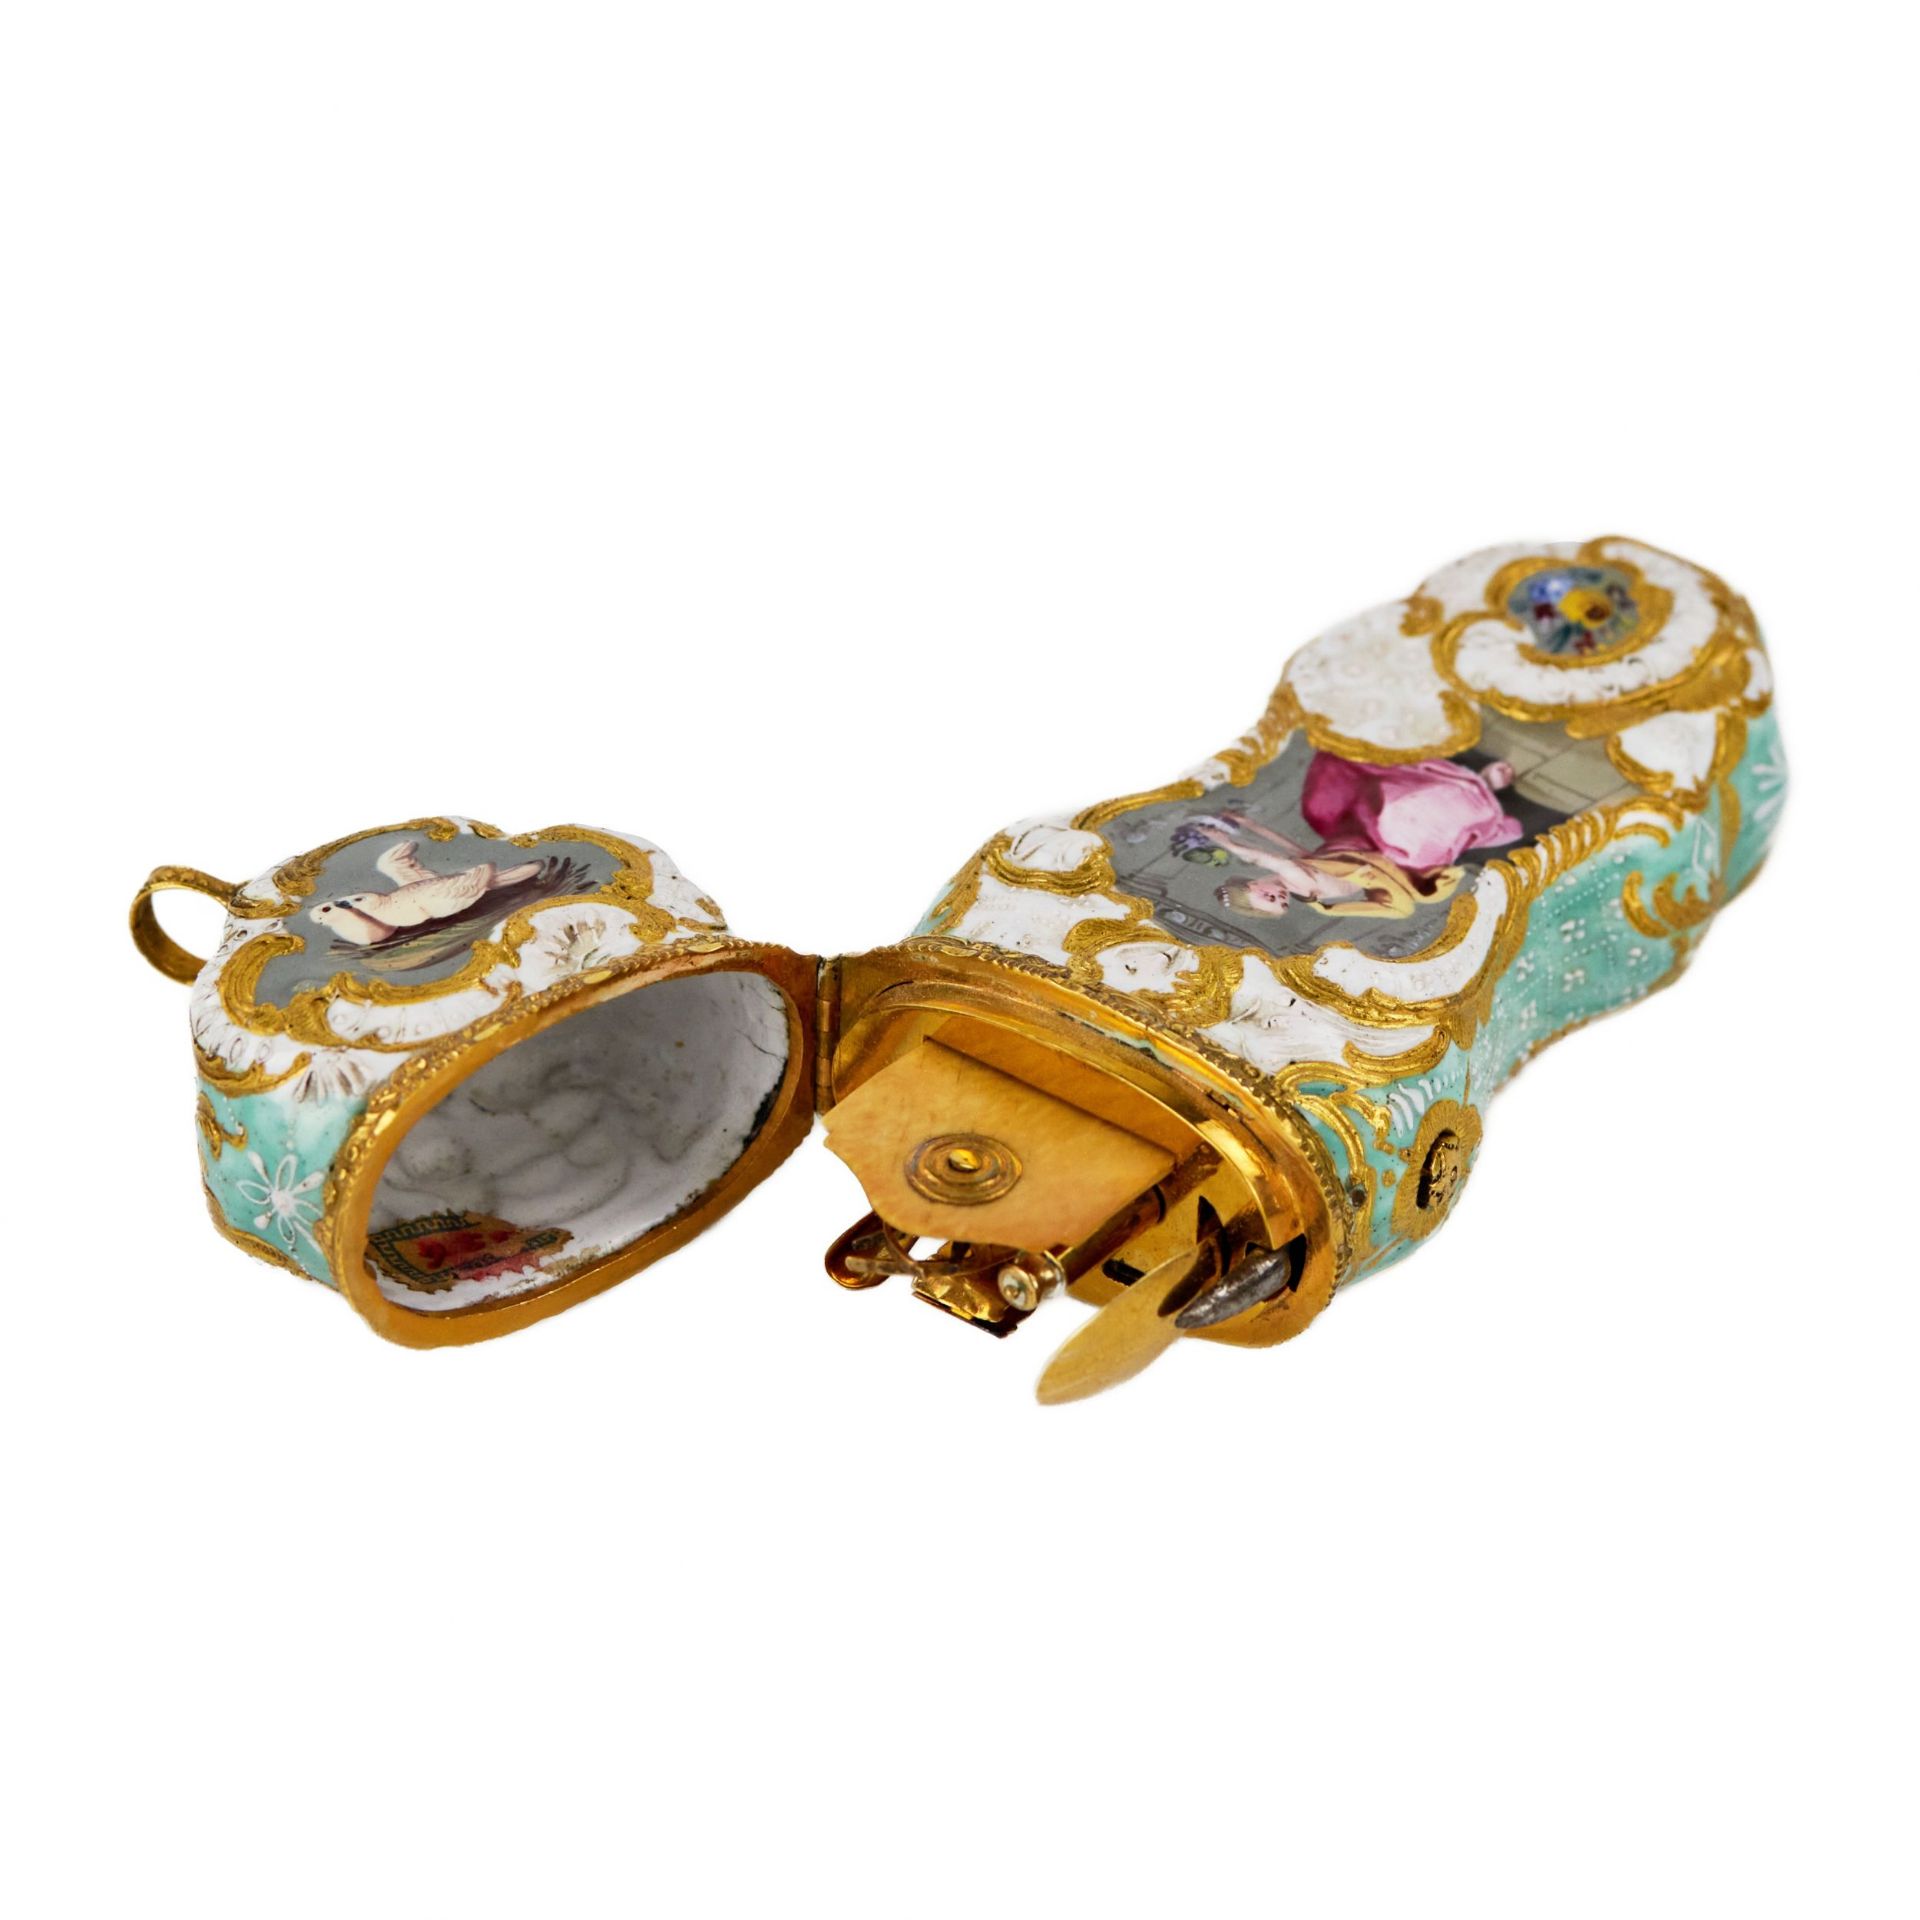 English painted porcelain necessaire with gold. 18 century. - Image 9 of 10